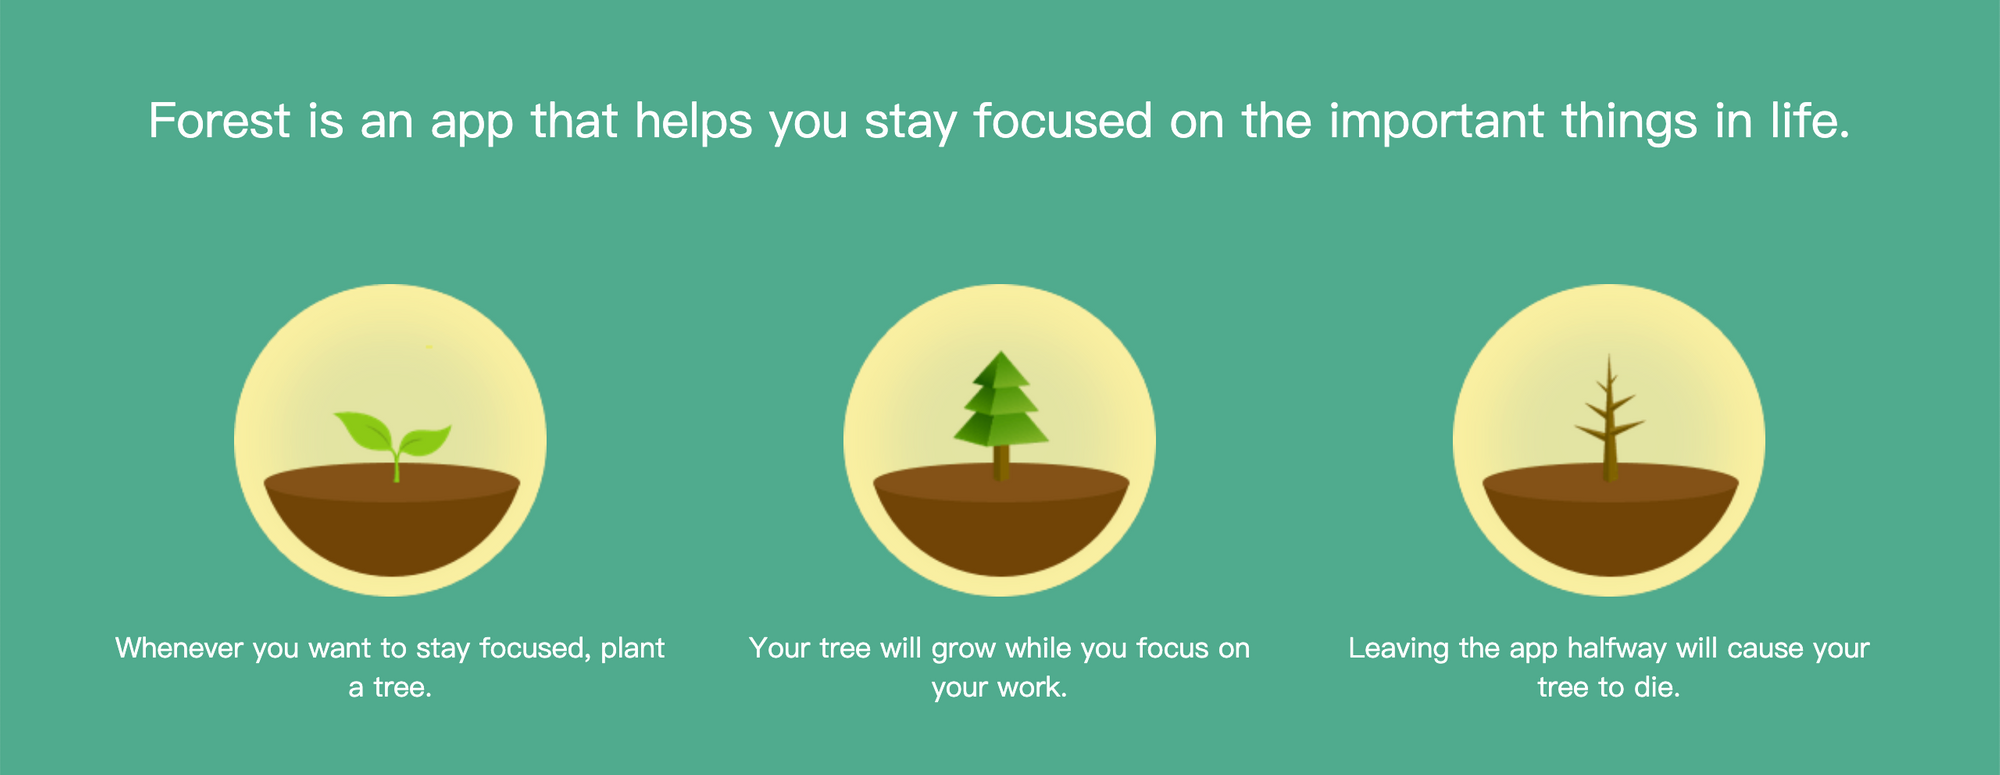 "Forest" app helps your productivity by growing a tree every time you stay focused enough